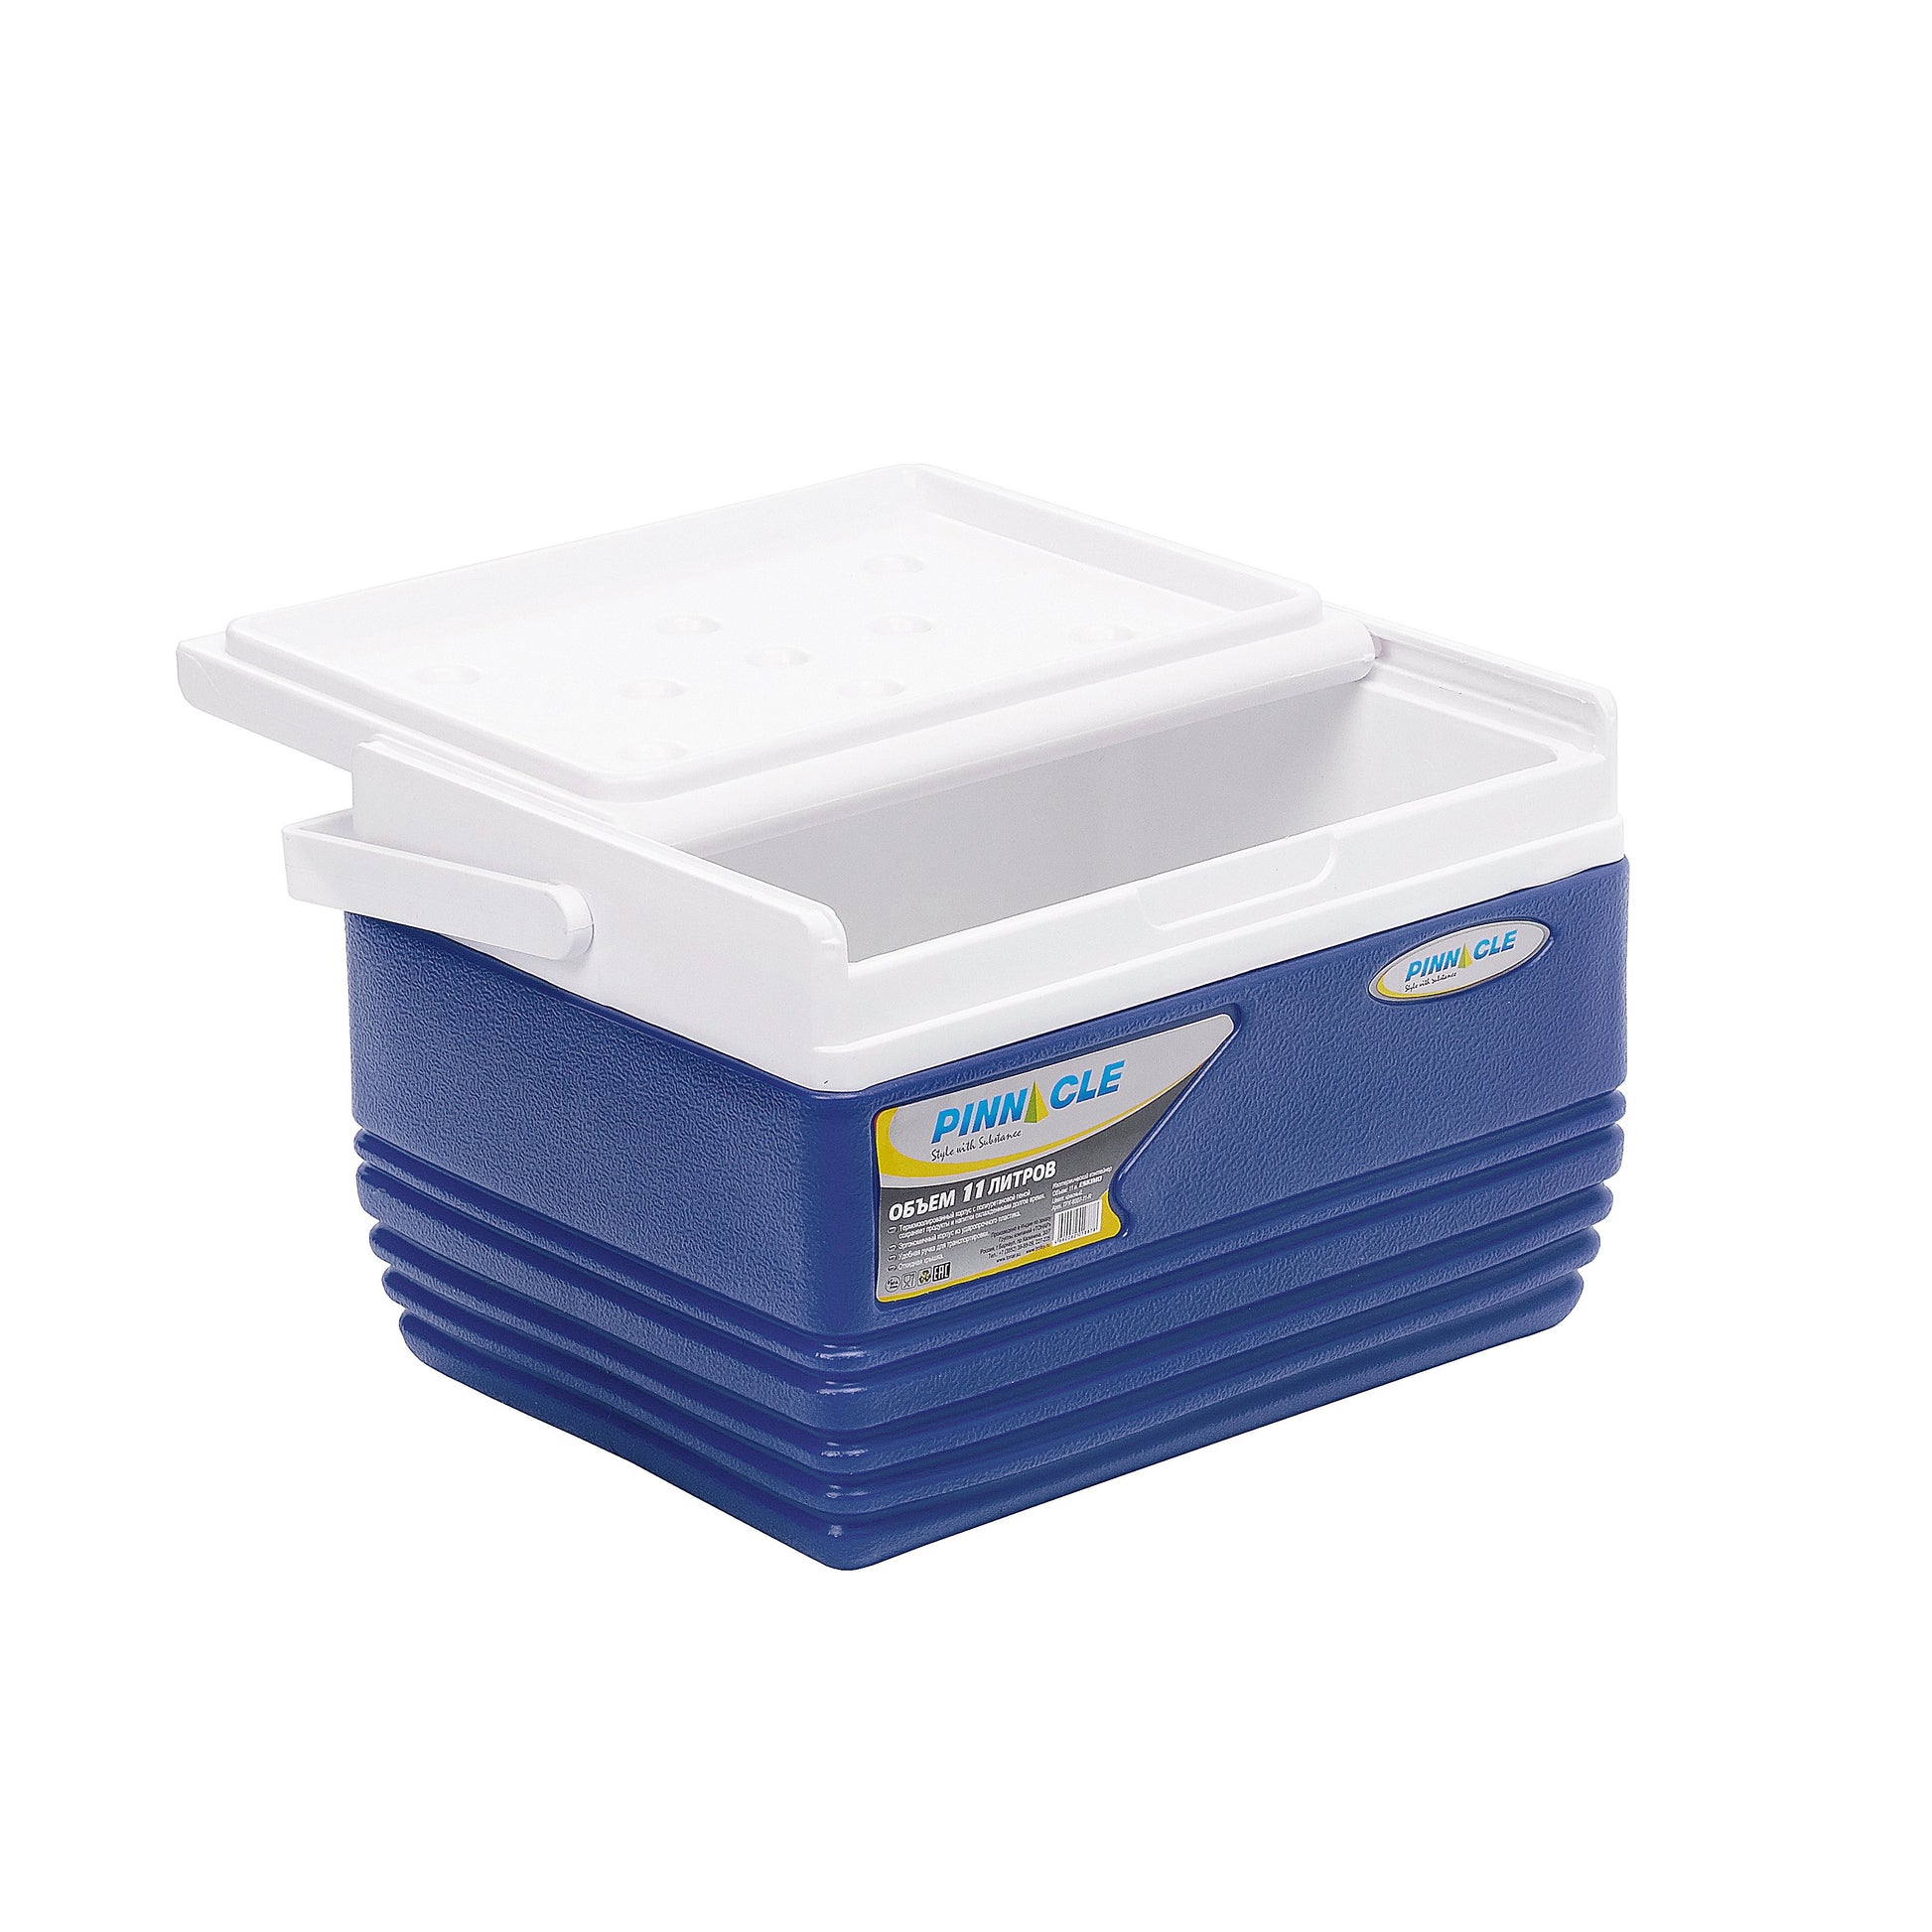 Eskimo Portable Hard-Sided Ice Chest for Camping, 11 qt, Navy Blue with a lid half opened